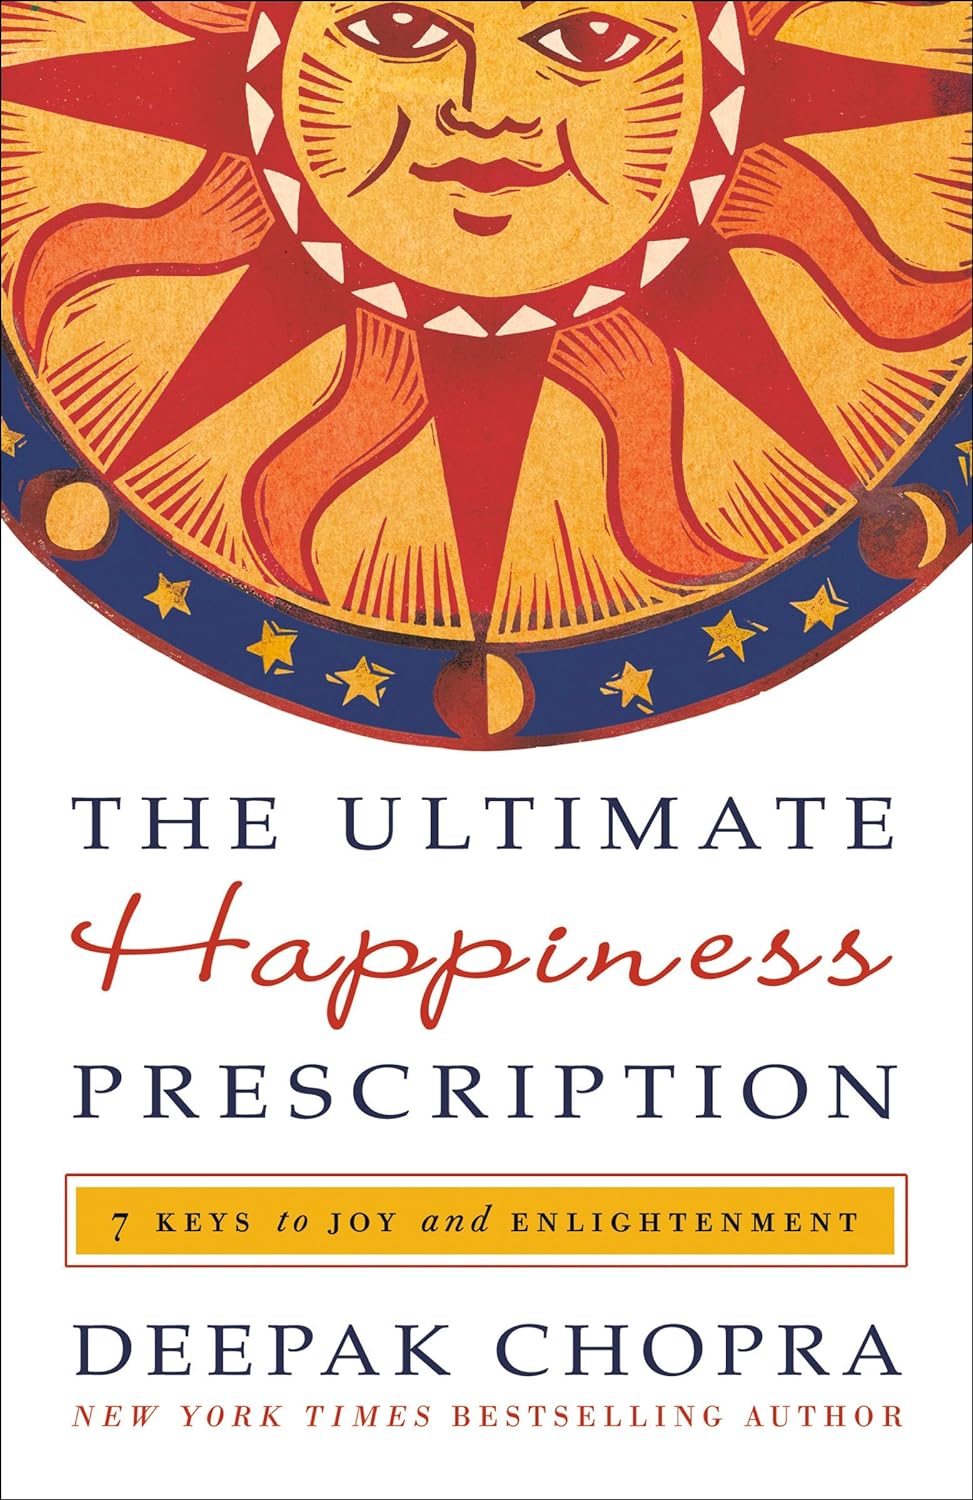 The Ultimate Happiness Prescription 7 Keys to Joy and Enlightenment - SureShot Books Publishing LLC